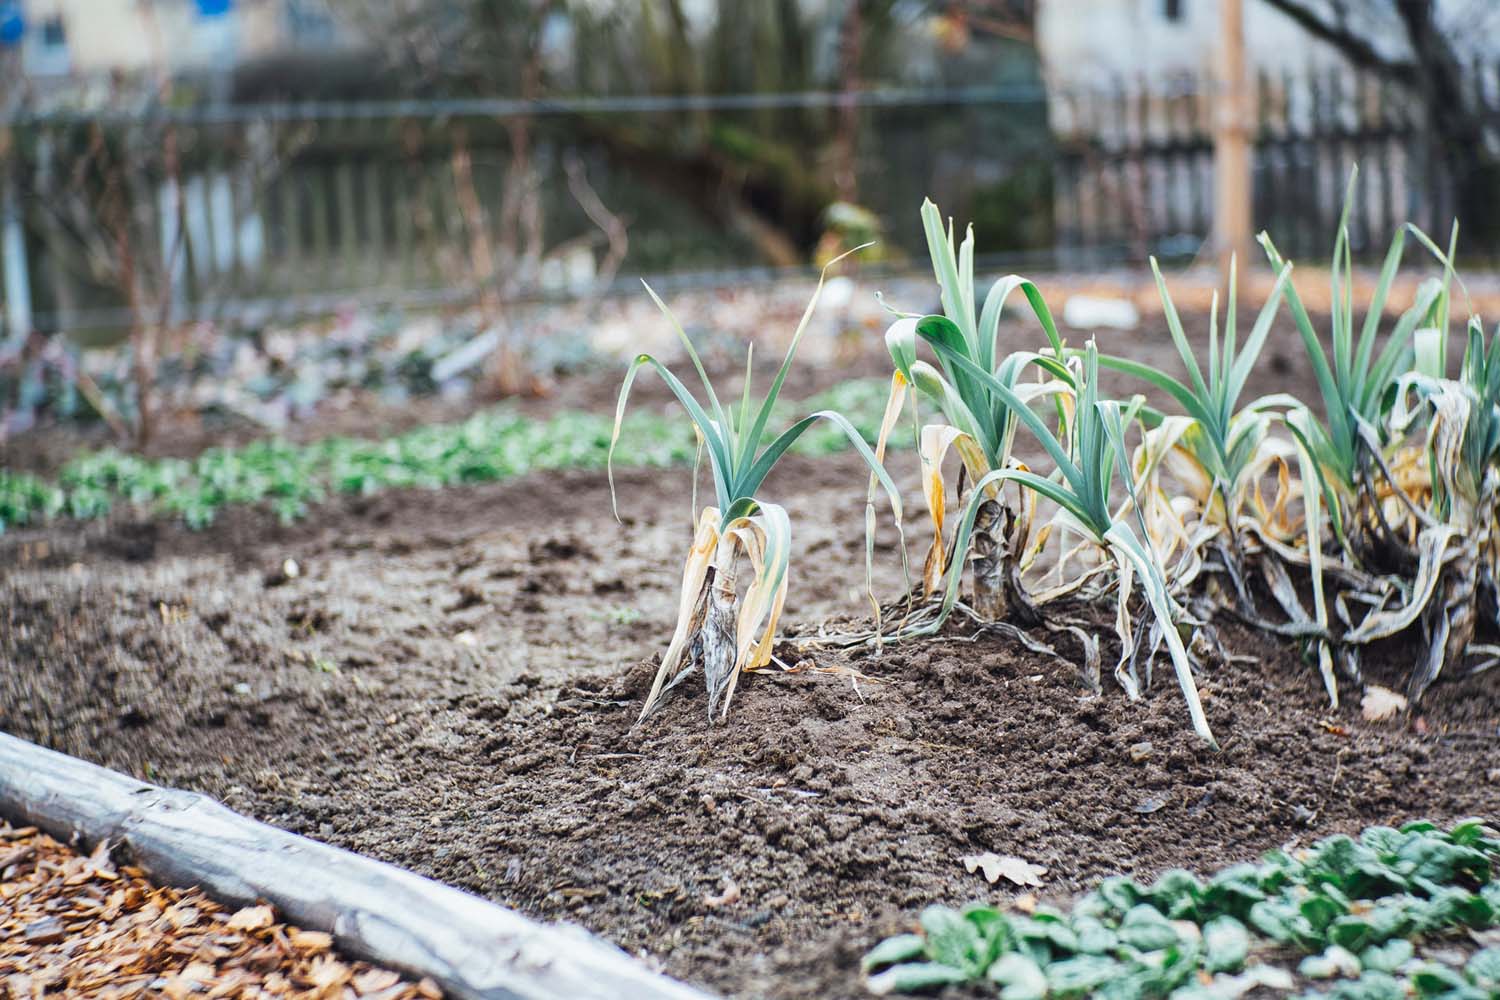 A close up photograph of a vegetable patch with rows of leeks sticking out of the brown soil 